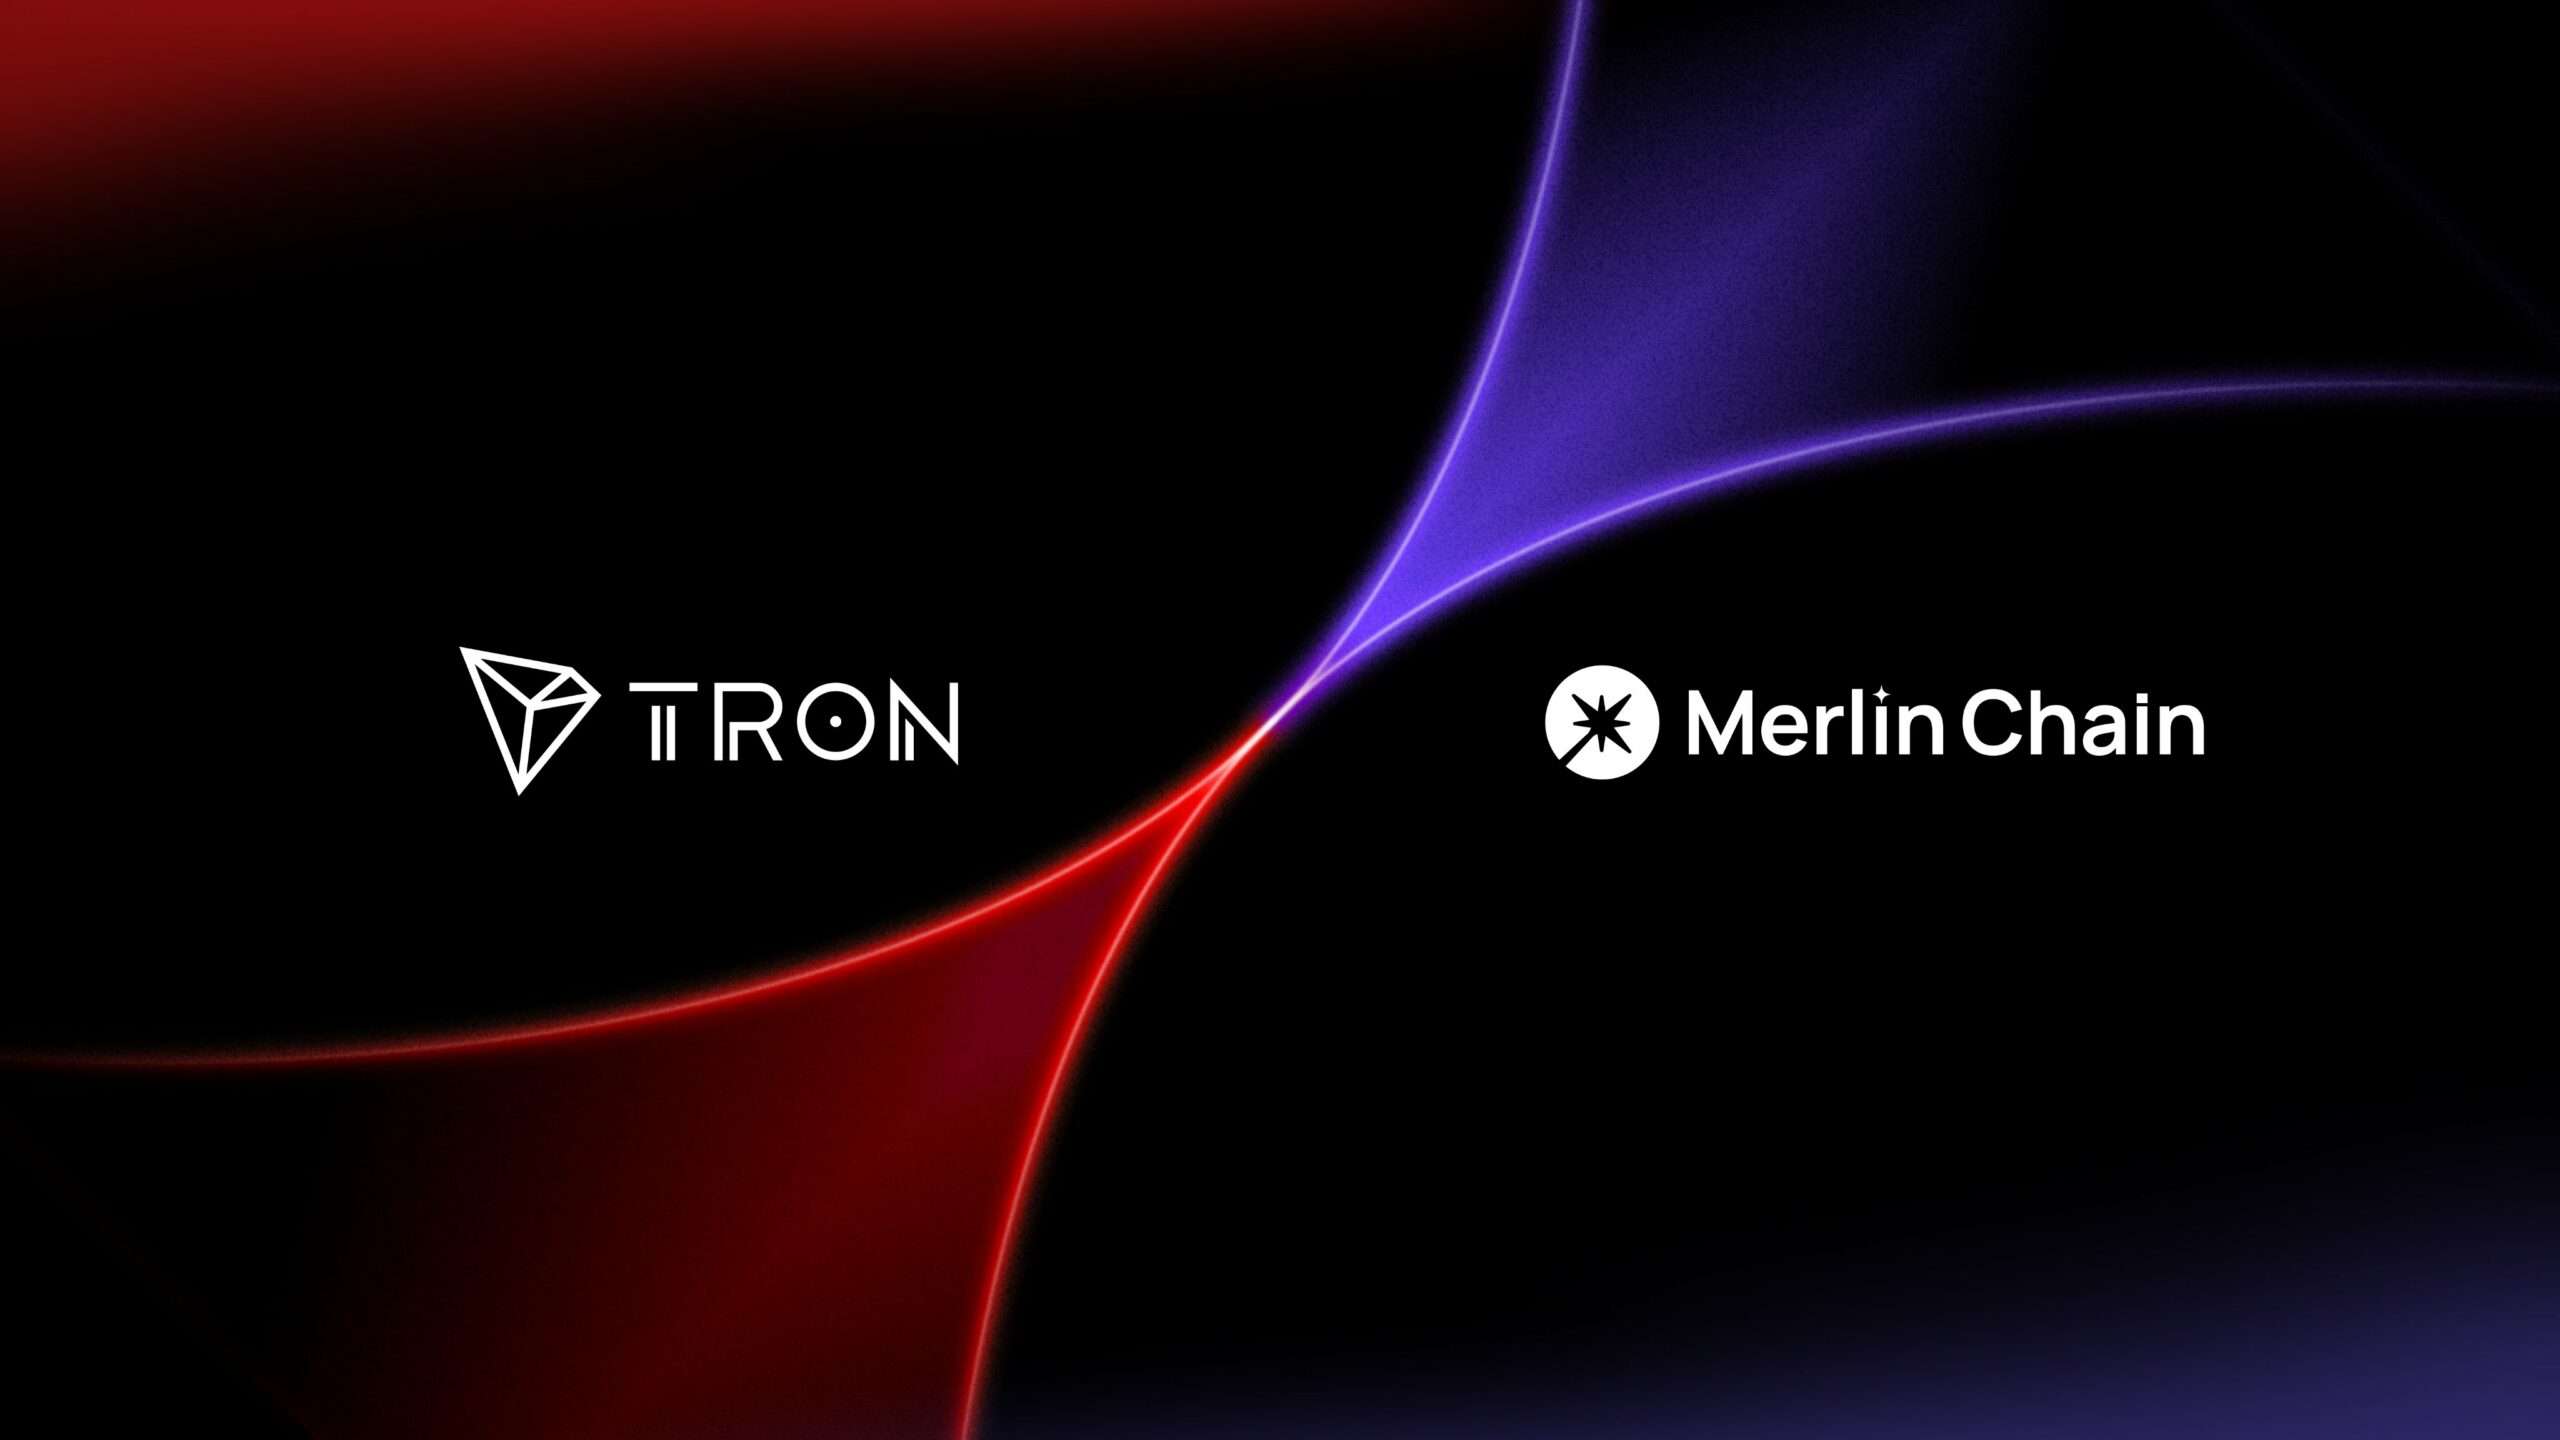 Merlin Chain Patners with Tron for Bitcoin Integration